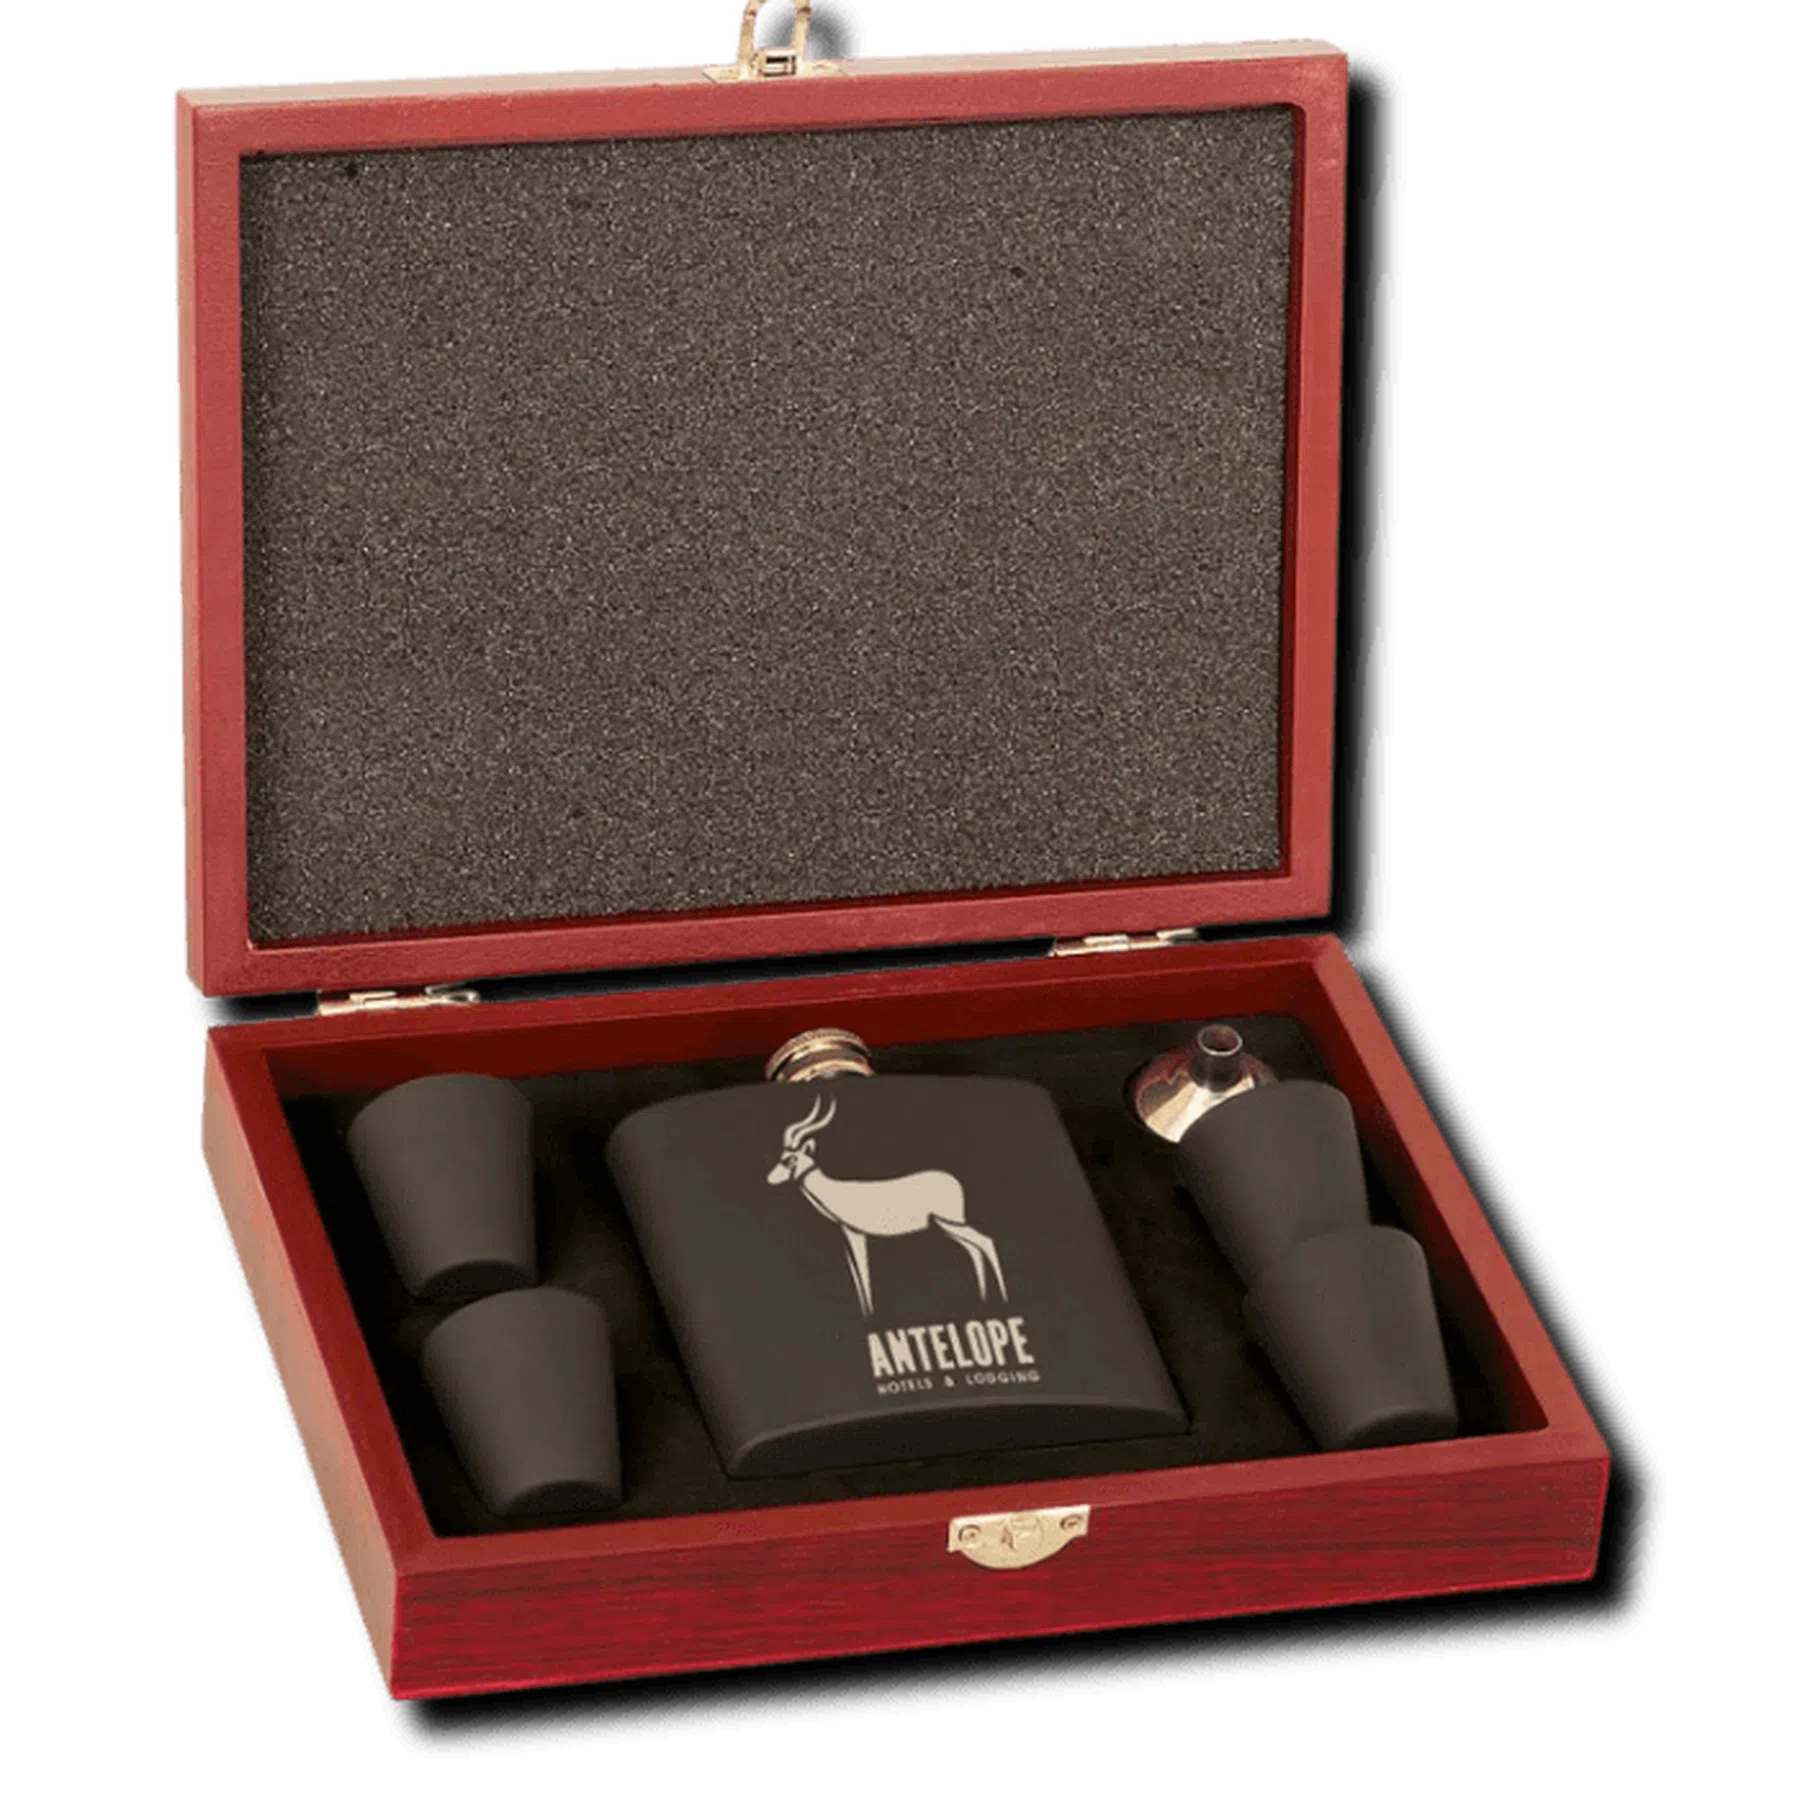 6 oz. Stainless Steel Flask Gift Set with Rosewood Finish Box